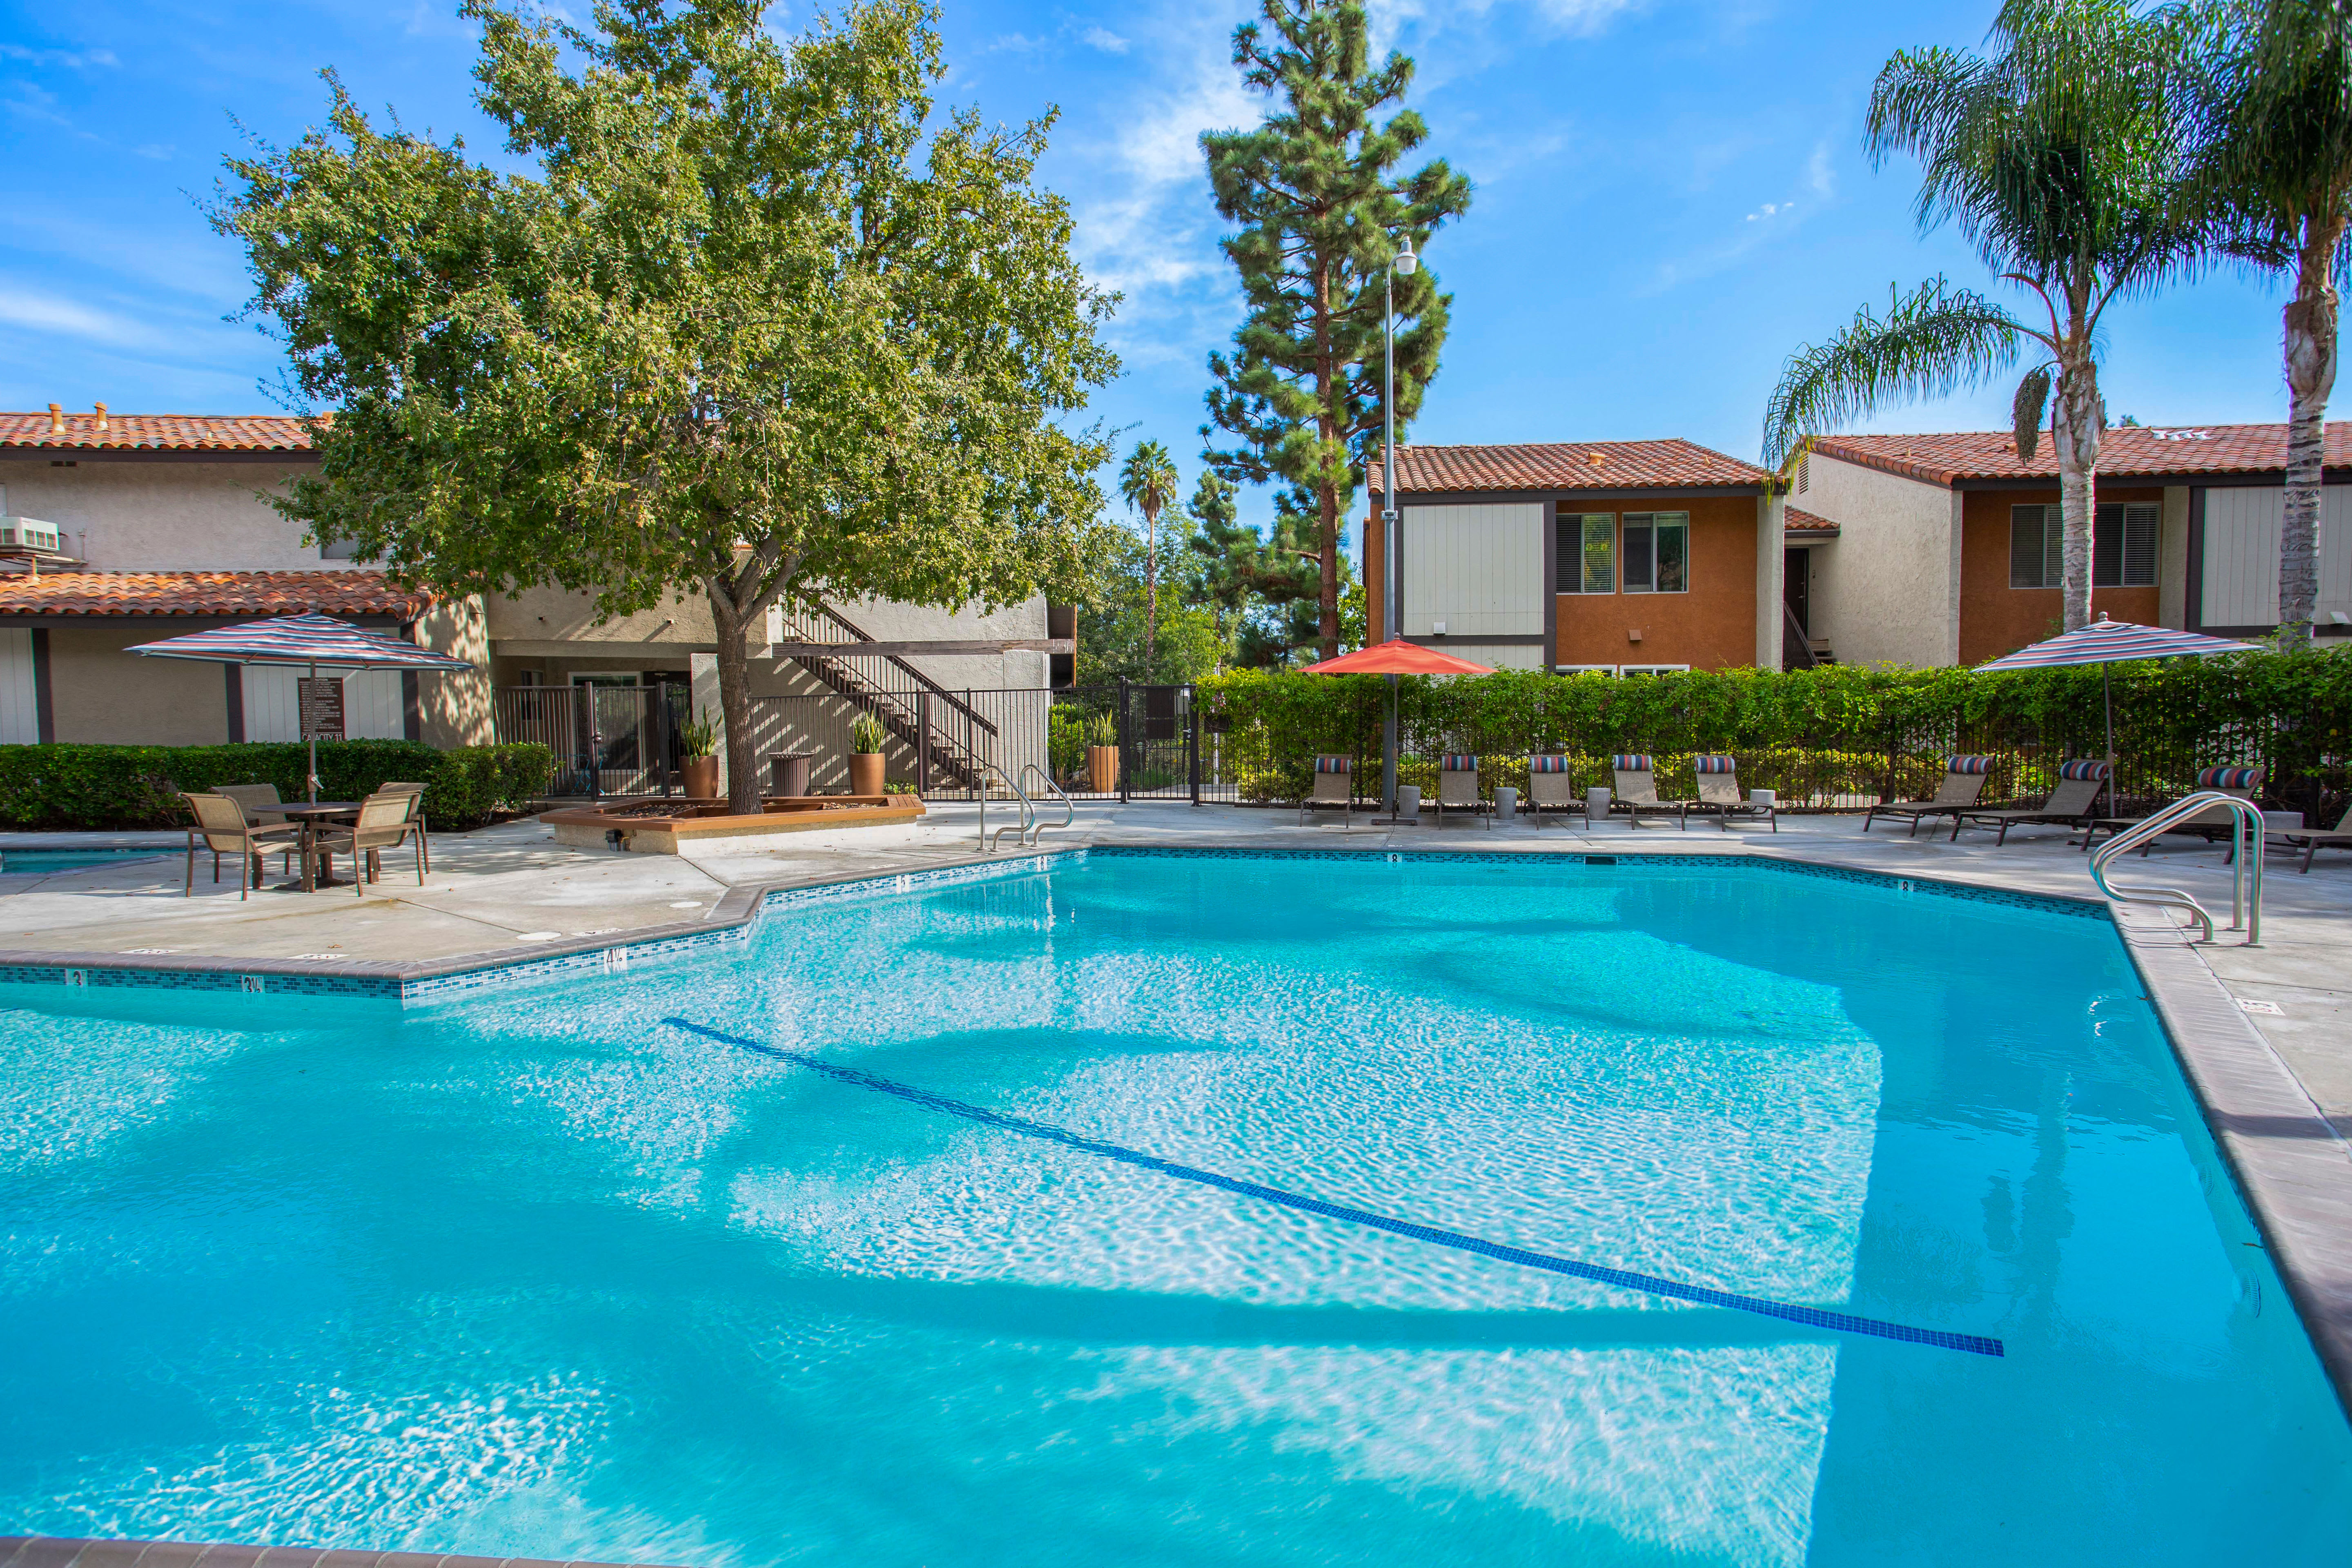 Apartments with a Swimming Pool at Sofi Thousand Oaks